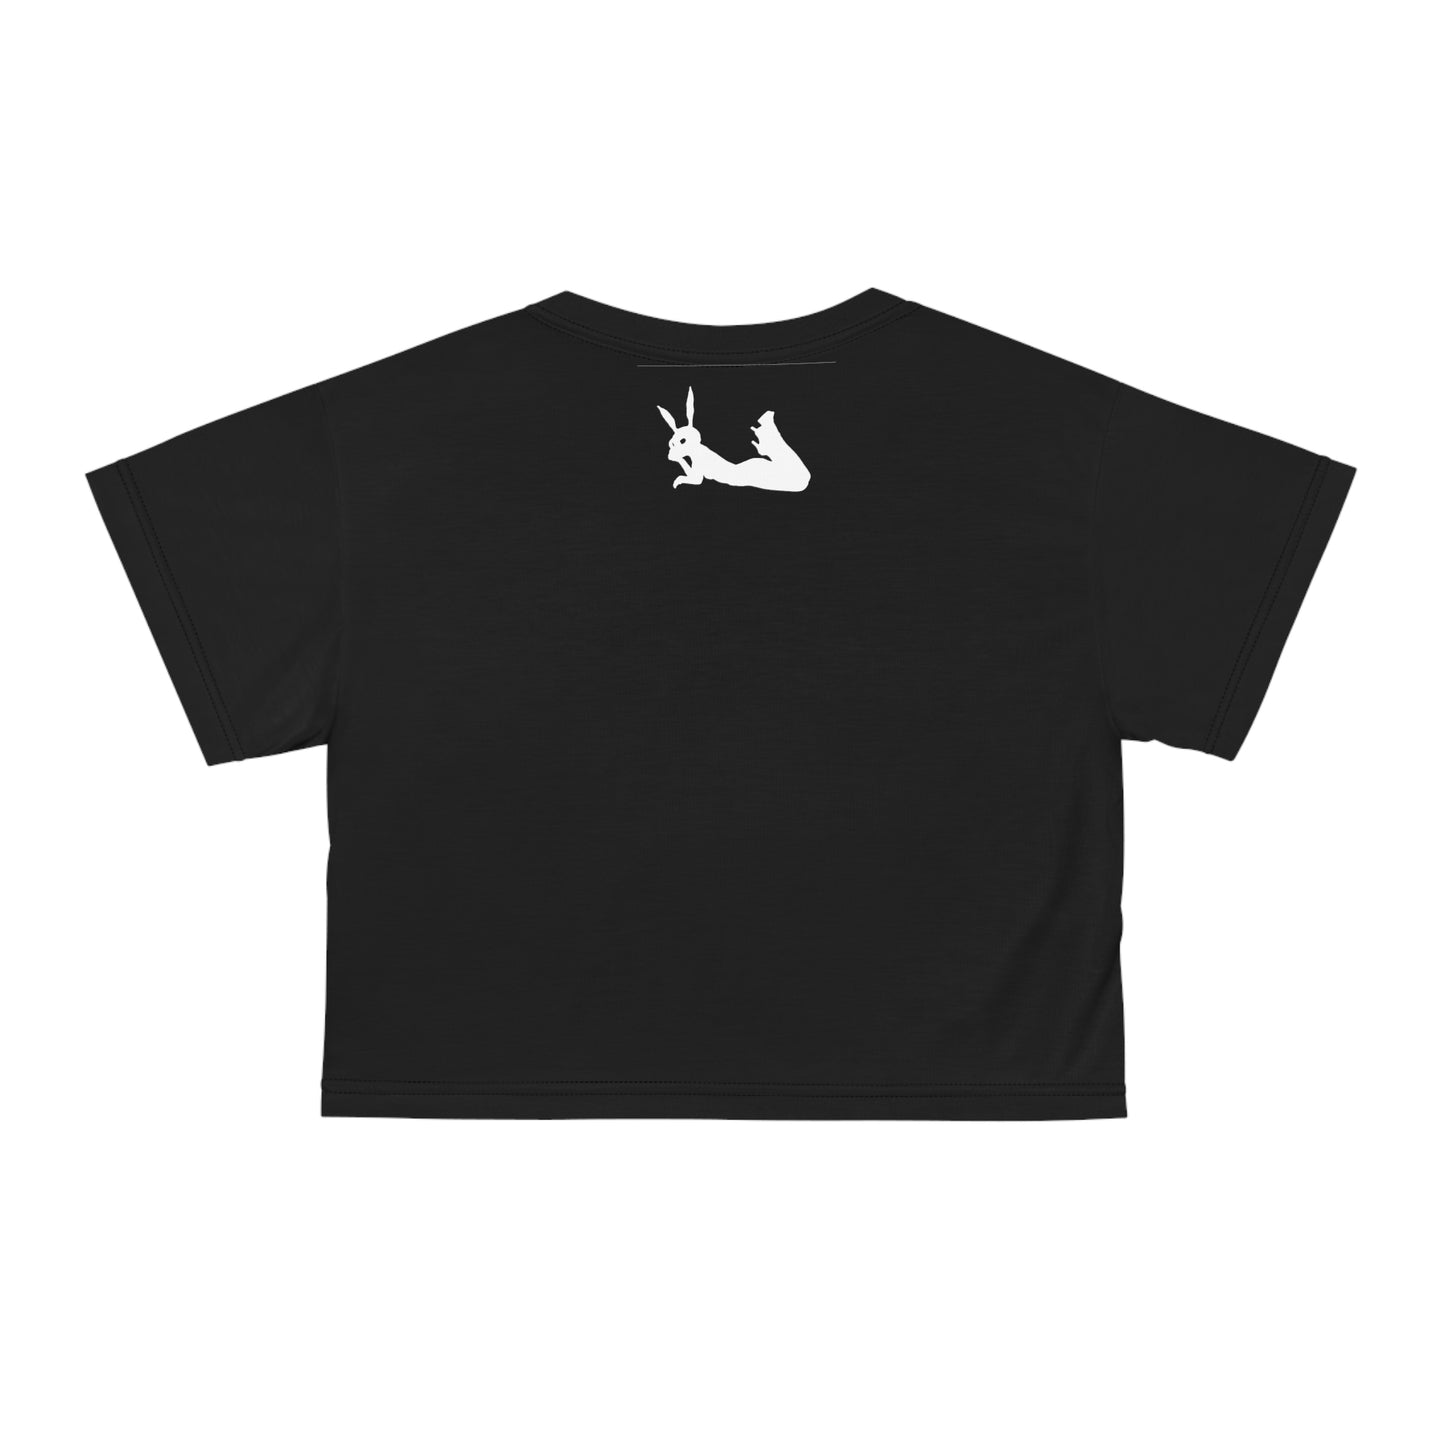 The Bunny Bless America Tee